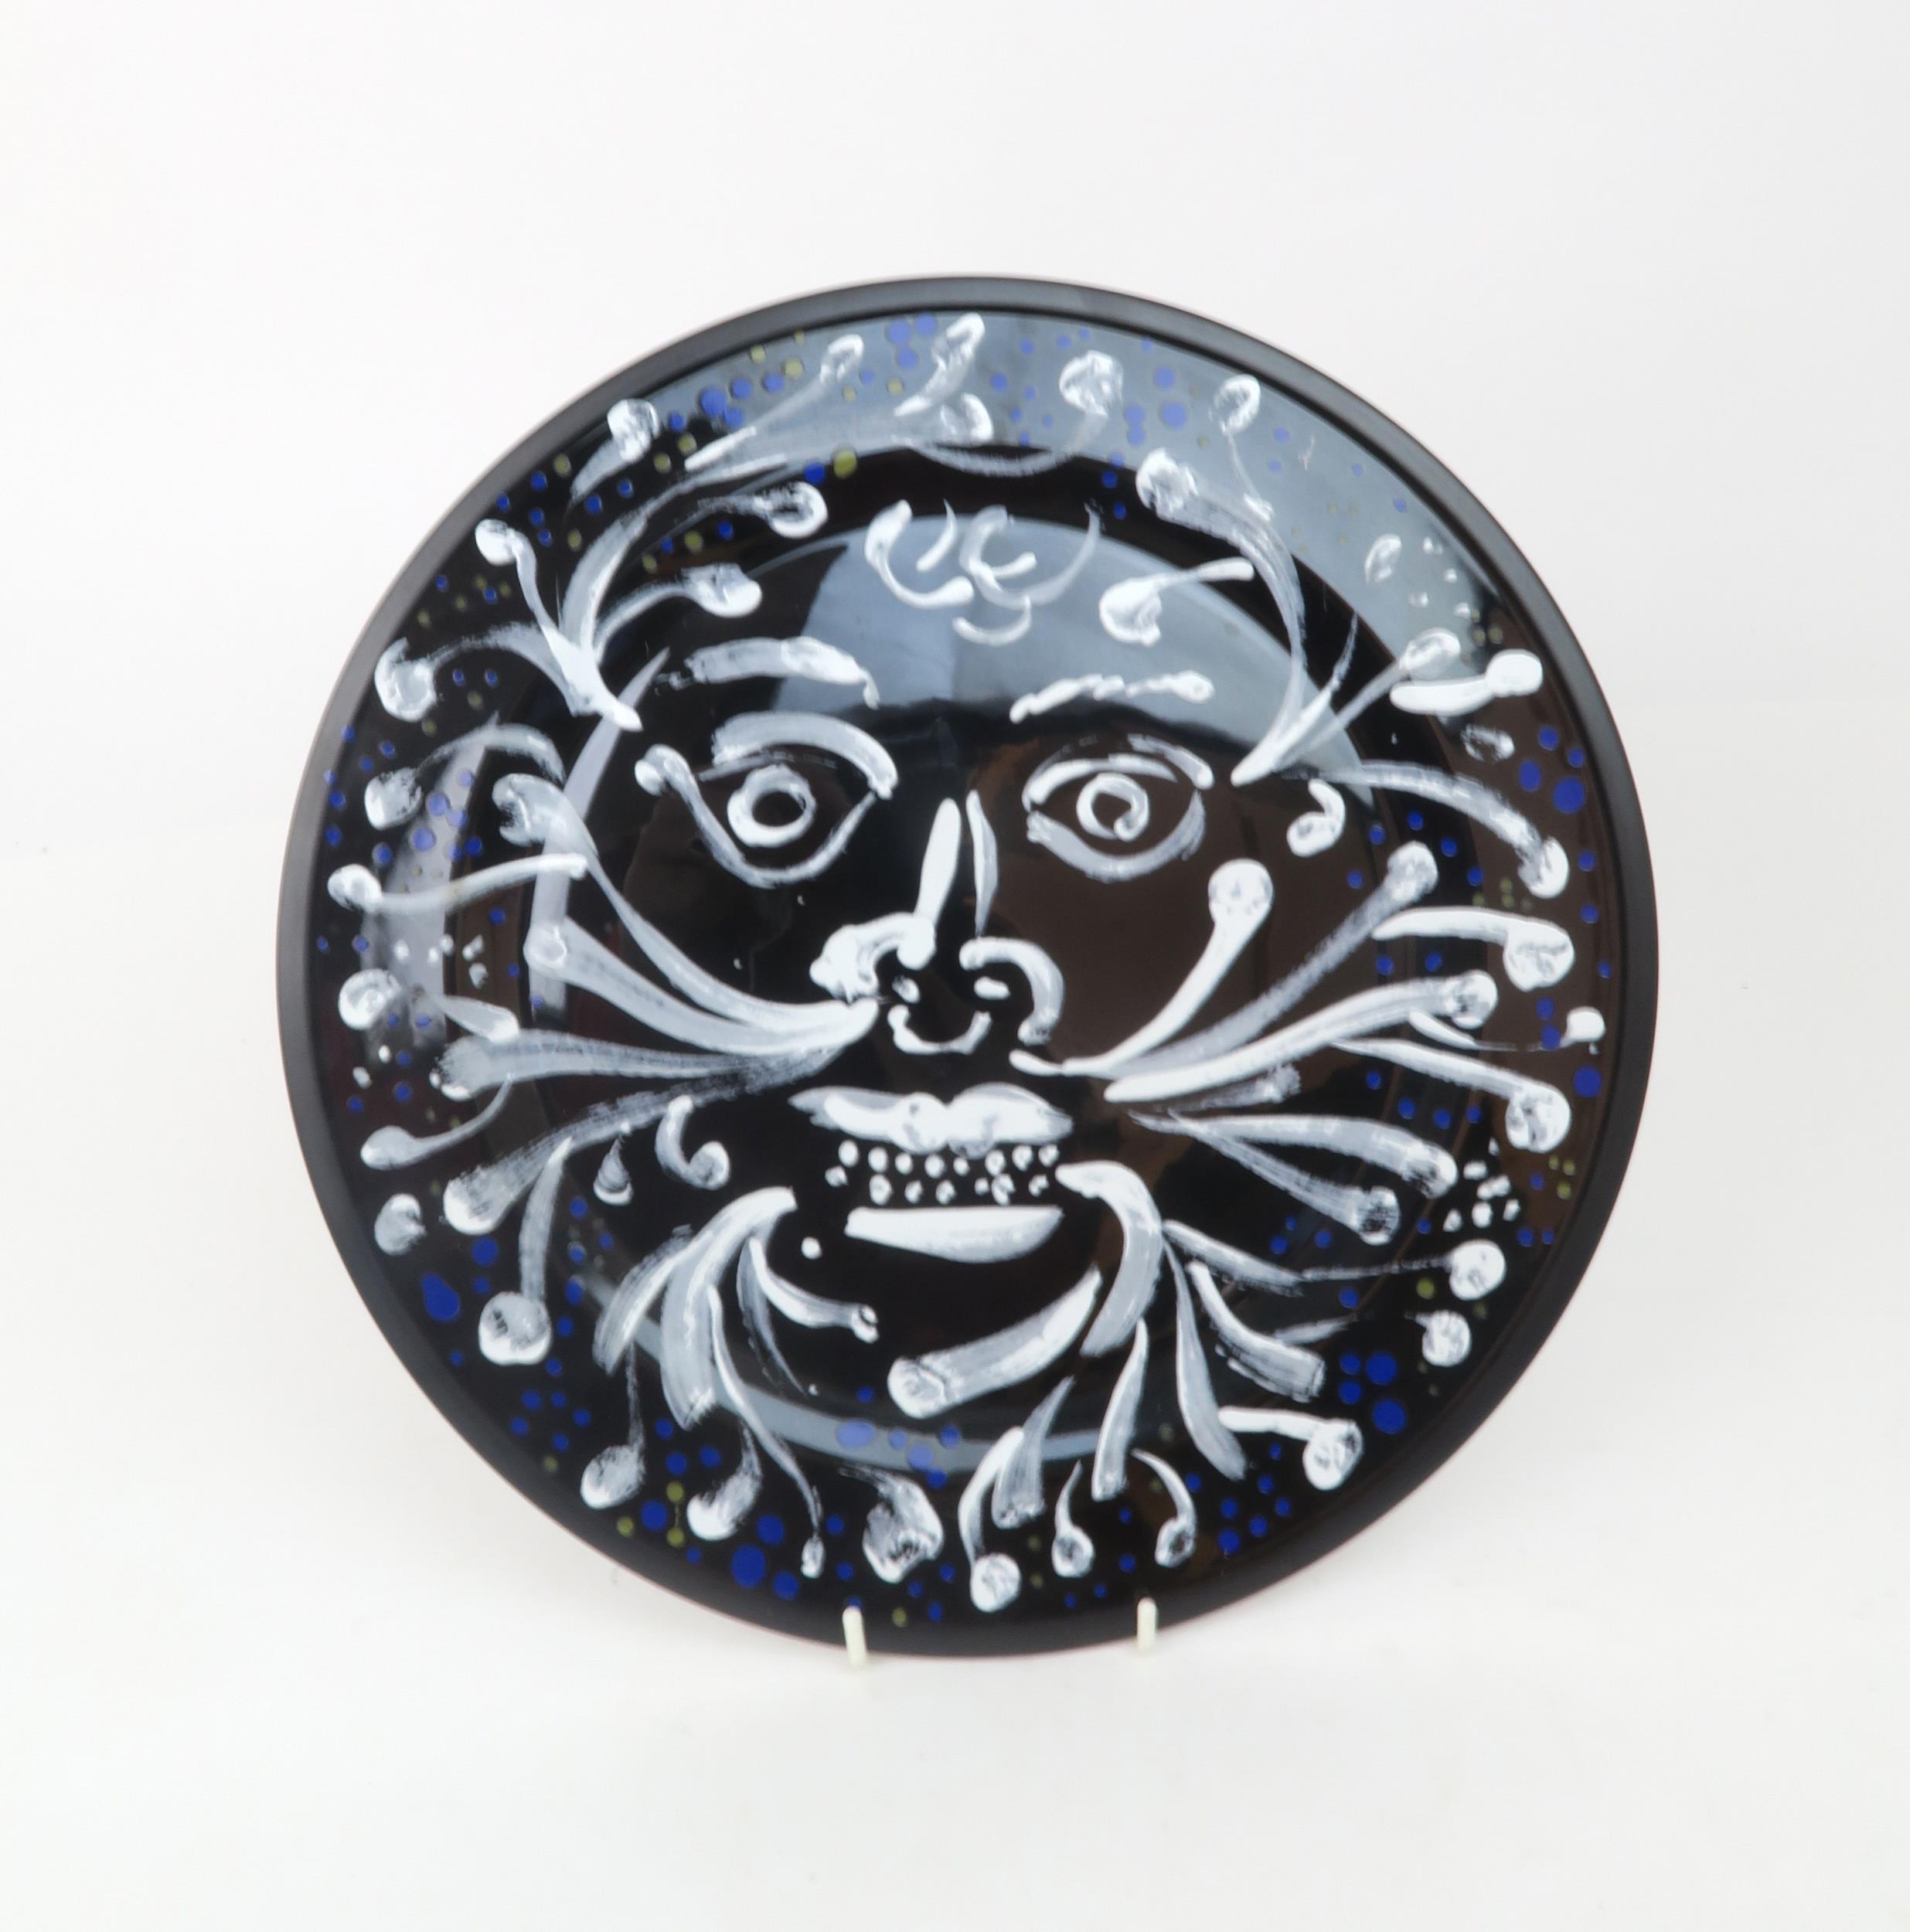 JOHN PIPER FOR WEDGWOOD The Green Man plate, printed on black basalt, from the set of six Art Plates